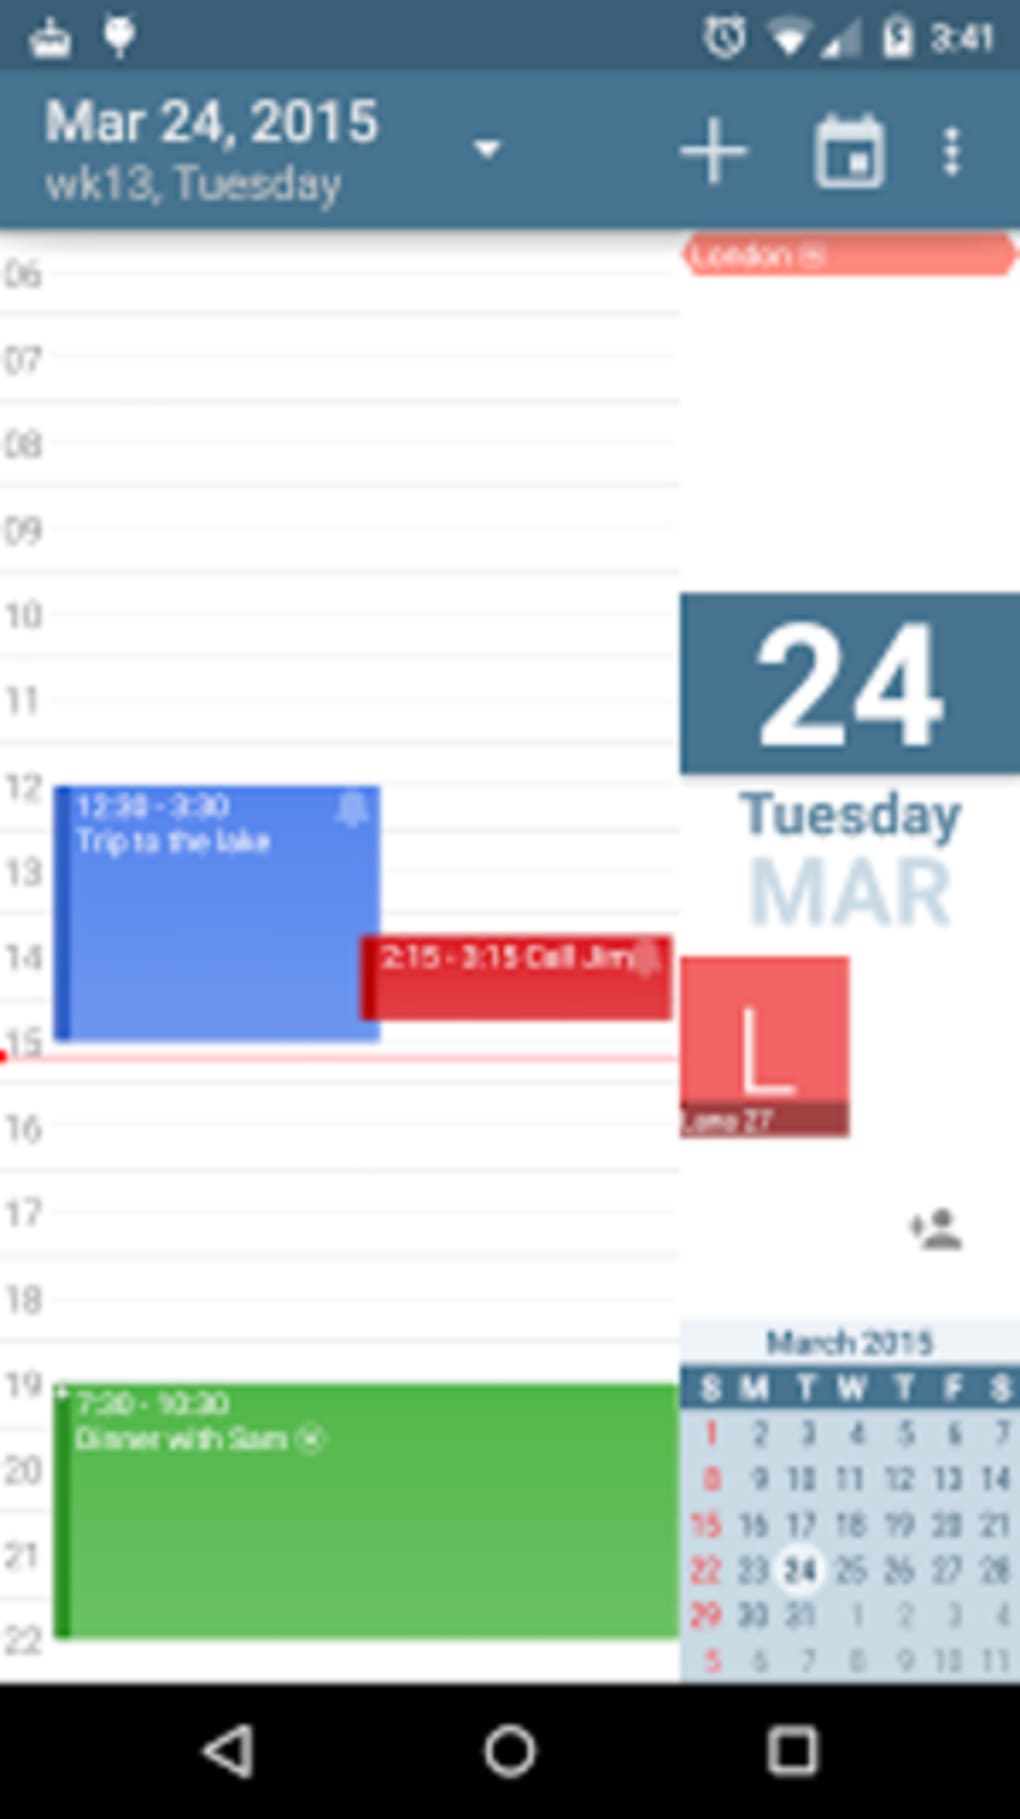 acalendar app for android